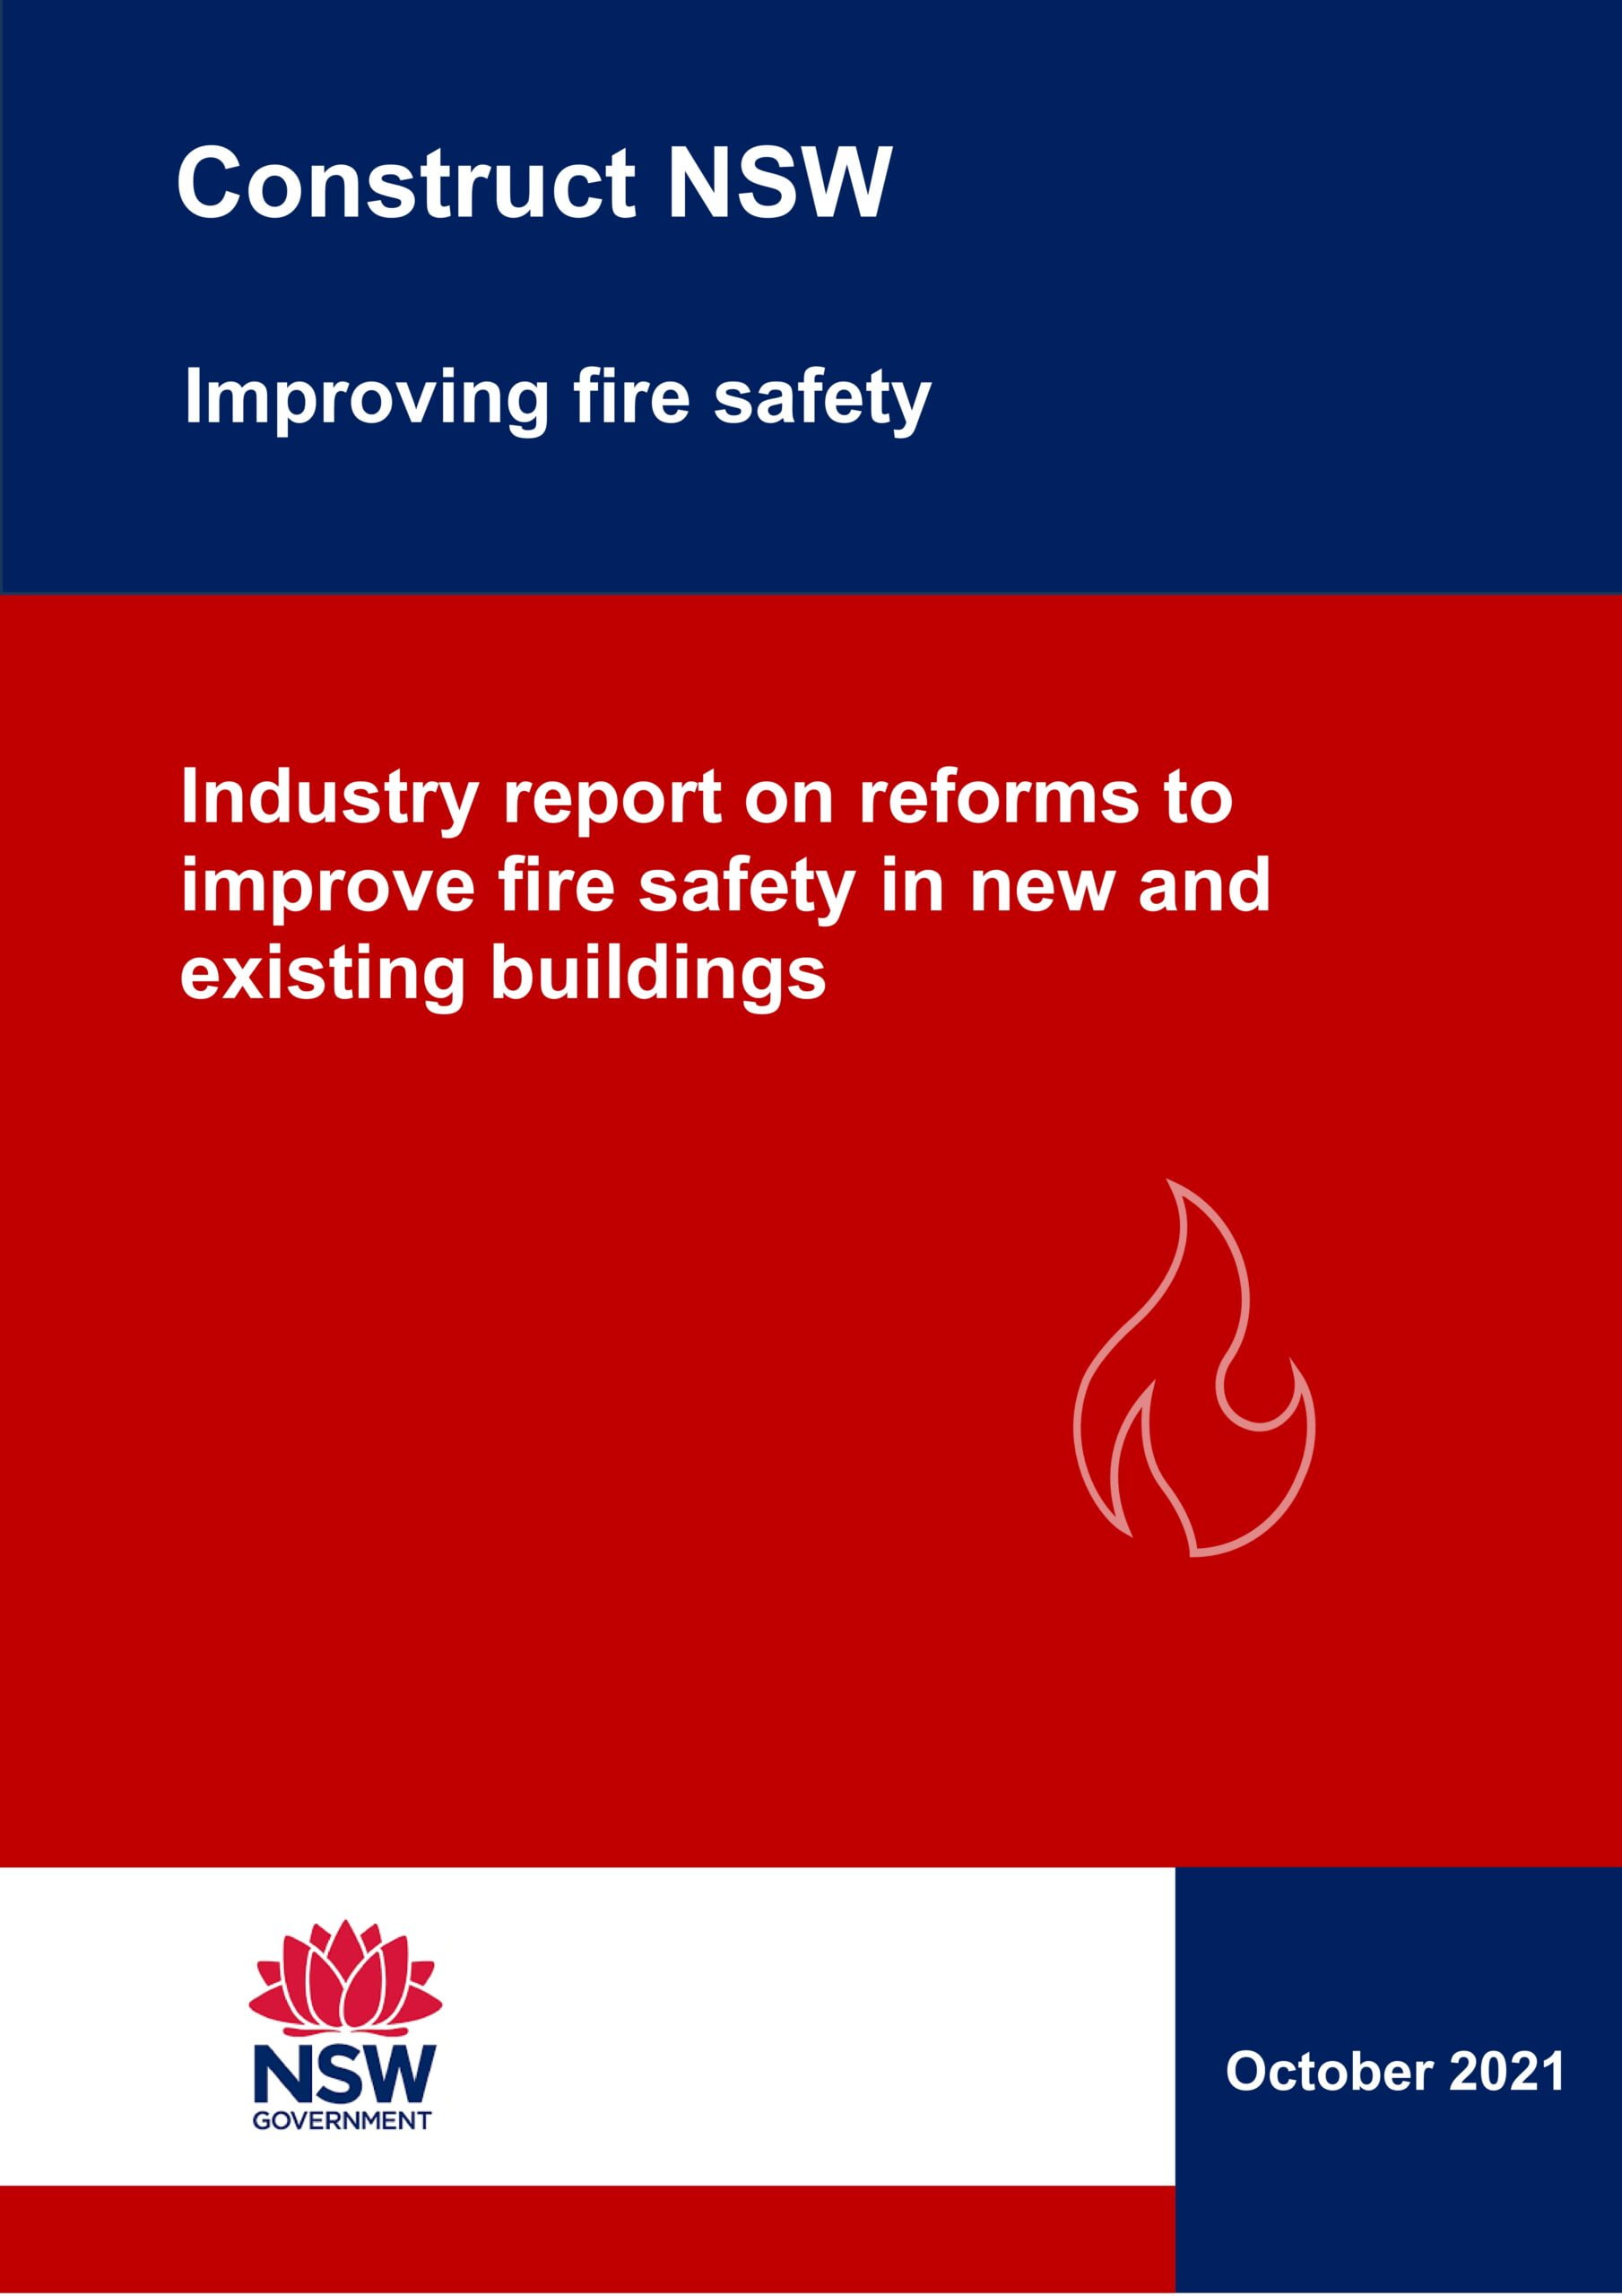 Improving fire safety in new and existing buildings